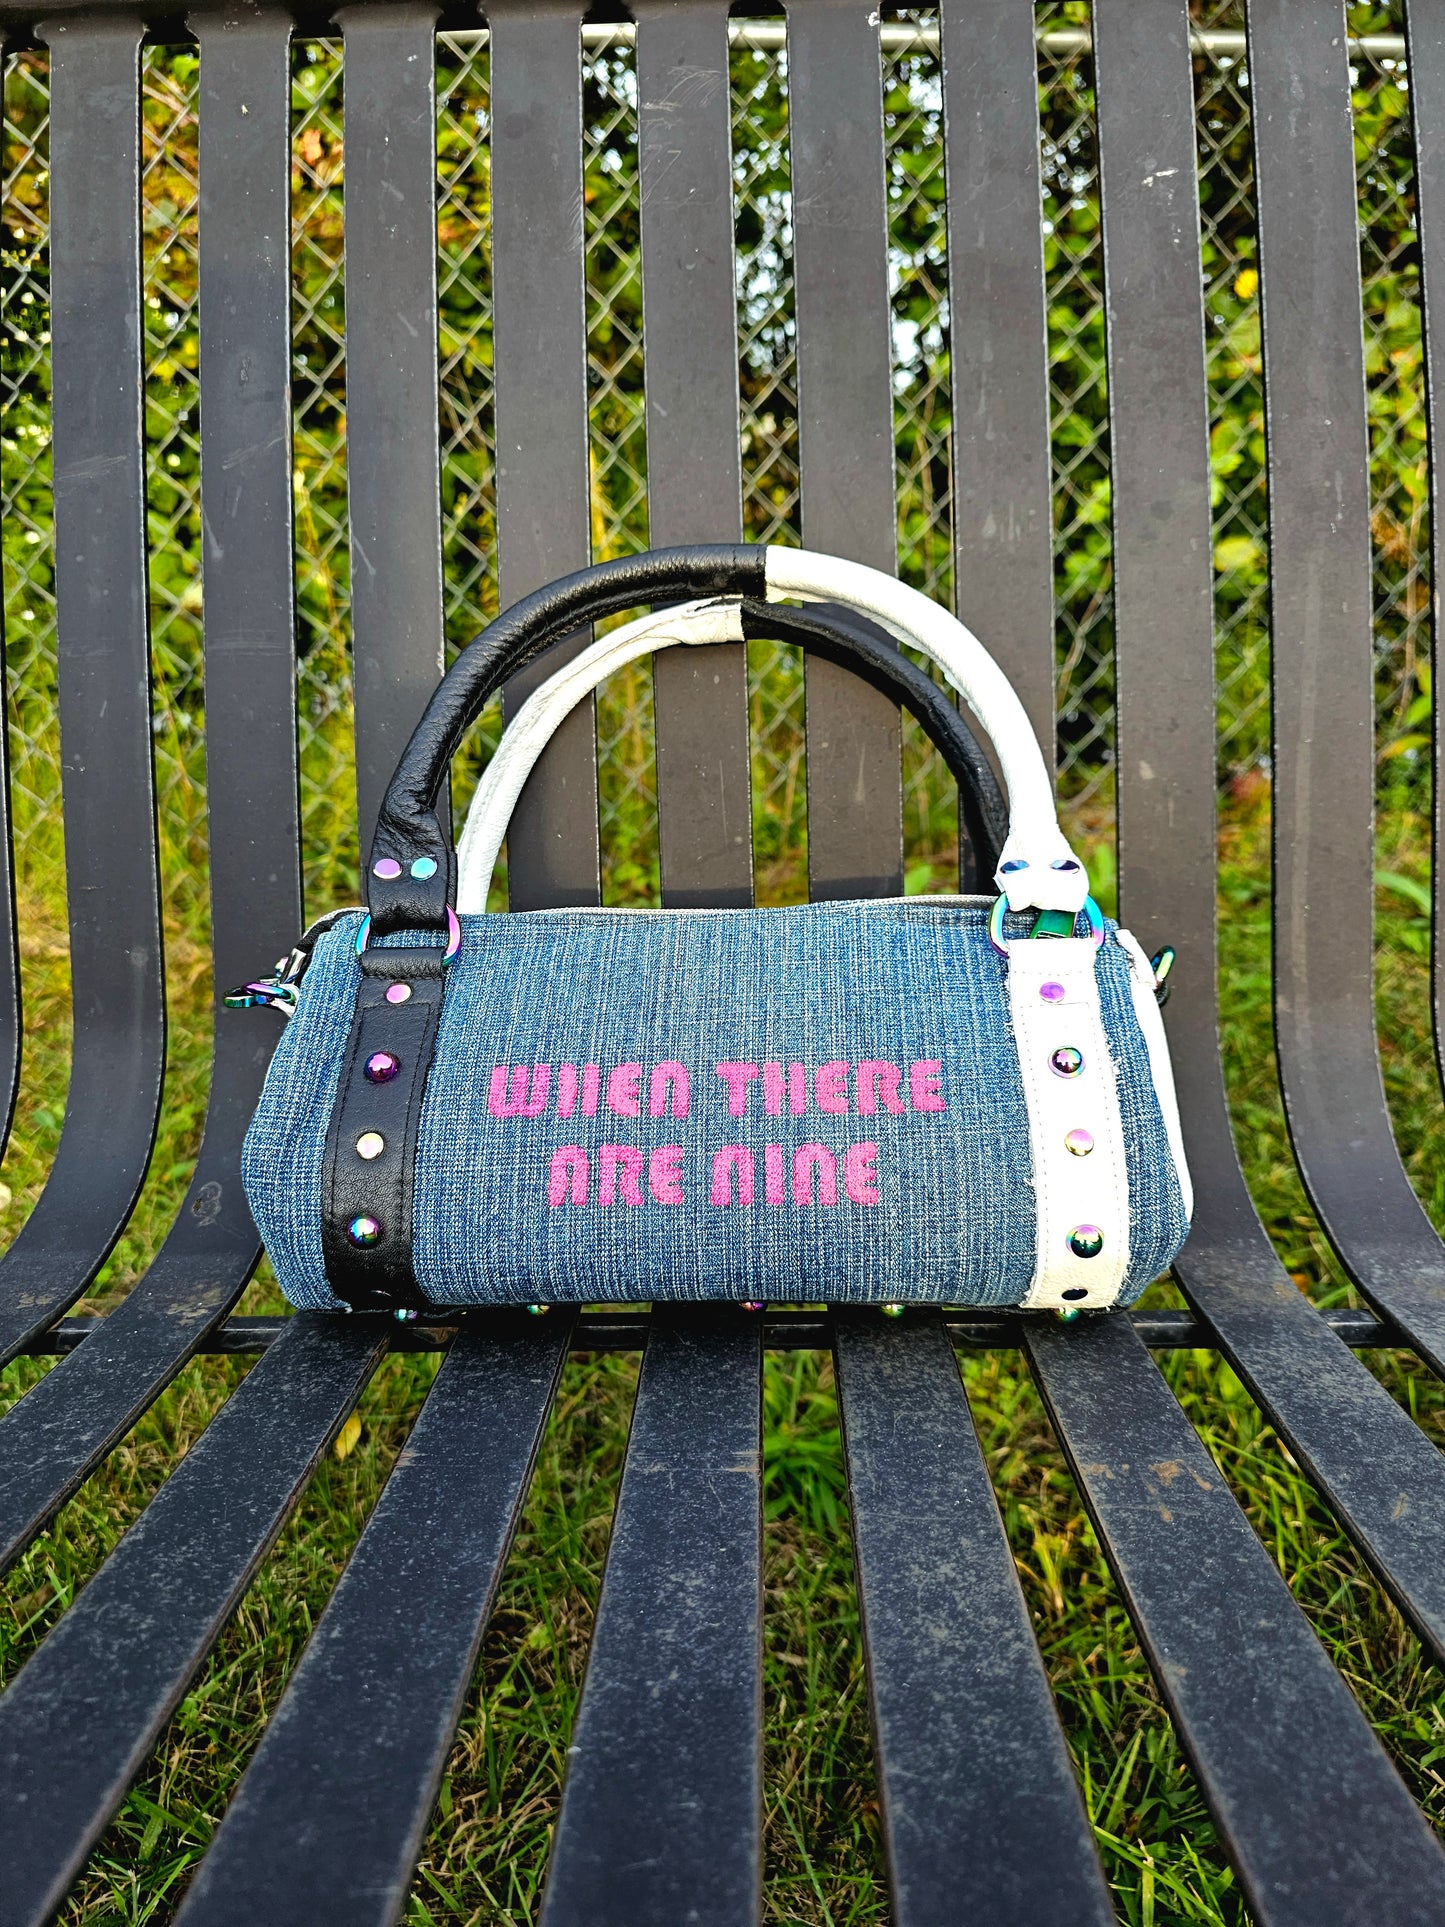 The Emily Bag: One Of A Kind